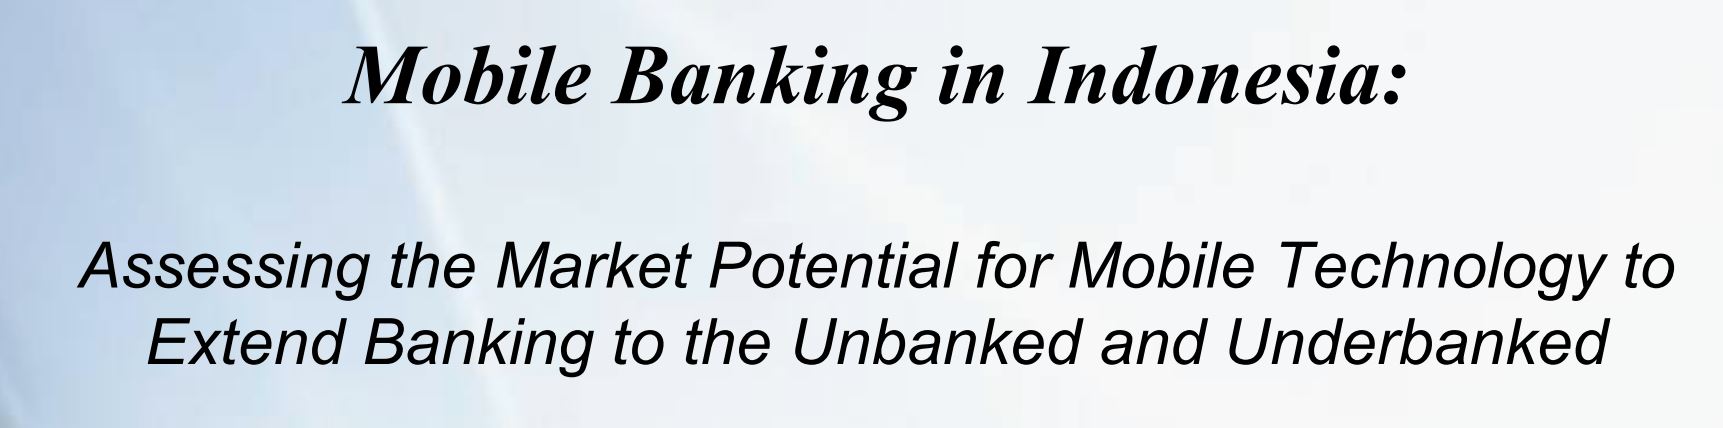 Mobile Banking in Indonesia: Assessing the Market Potential for Mobile Technology to Extend Banking to the Unbanked and Underbanked